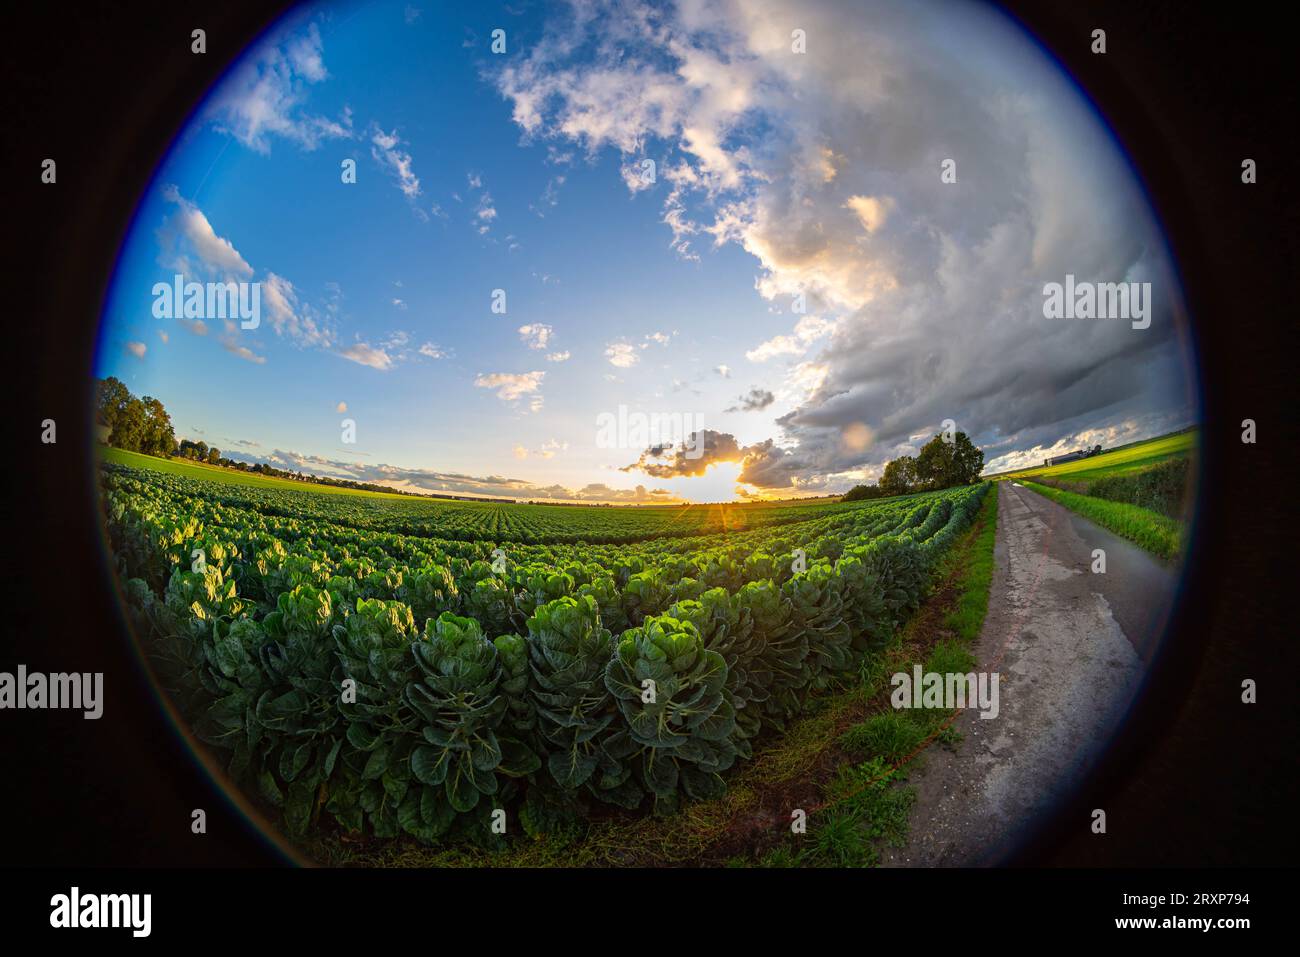 Fisheye view of a cabbage field at sunset Stock Photo